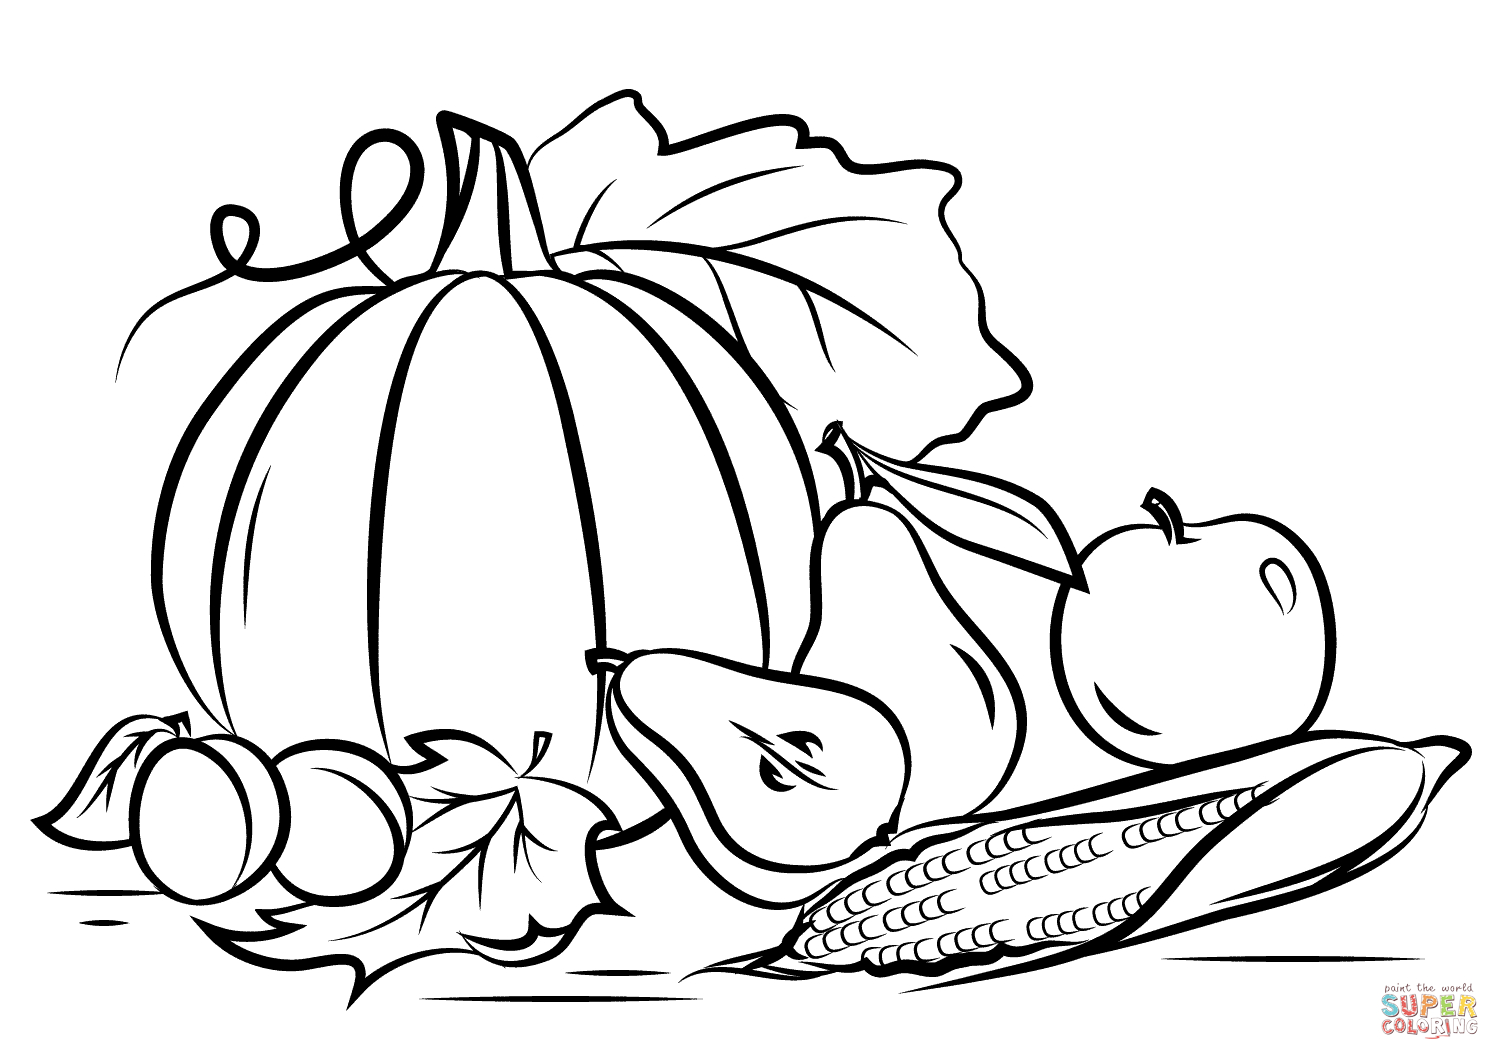 Fall Coloring Page Autumn Harvest Coloring Page Free Printable Coloring Pages